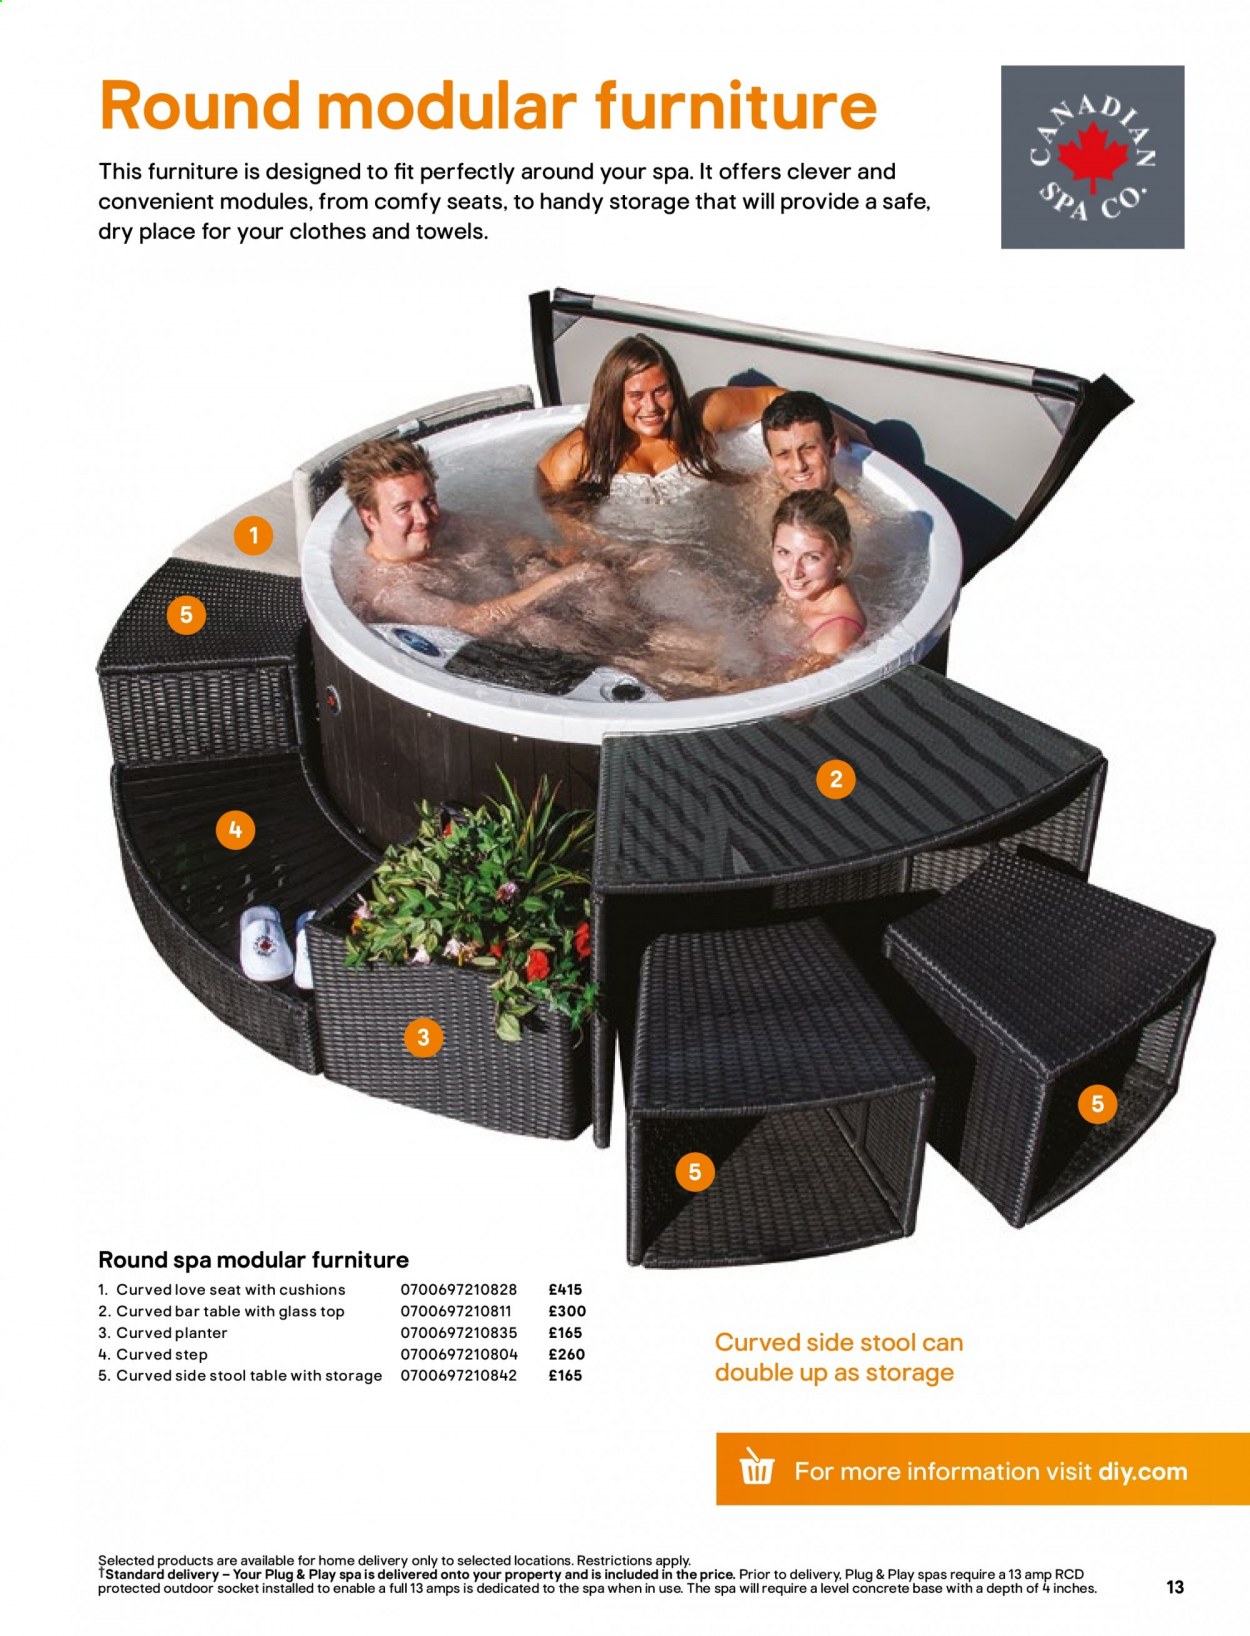 thumbnail - B&Q offer  - Sales products - cushion, towel, table, stool, coctail table. Page 13.